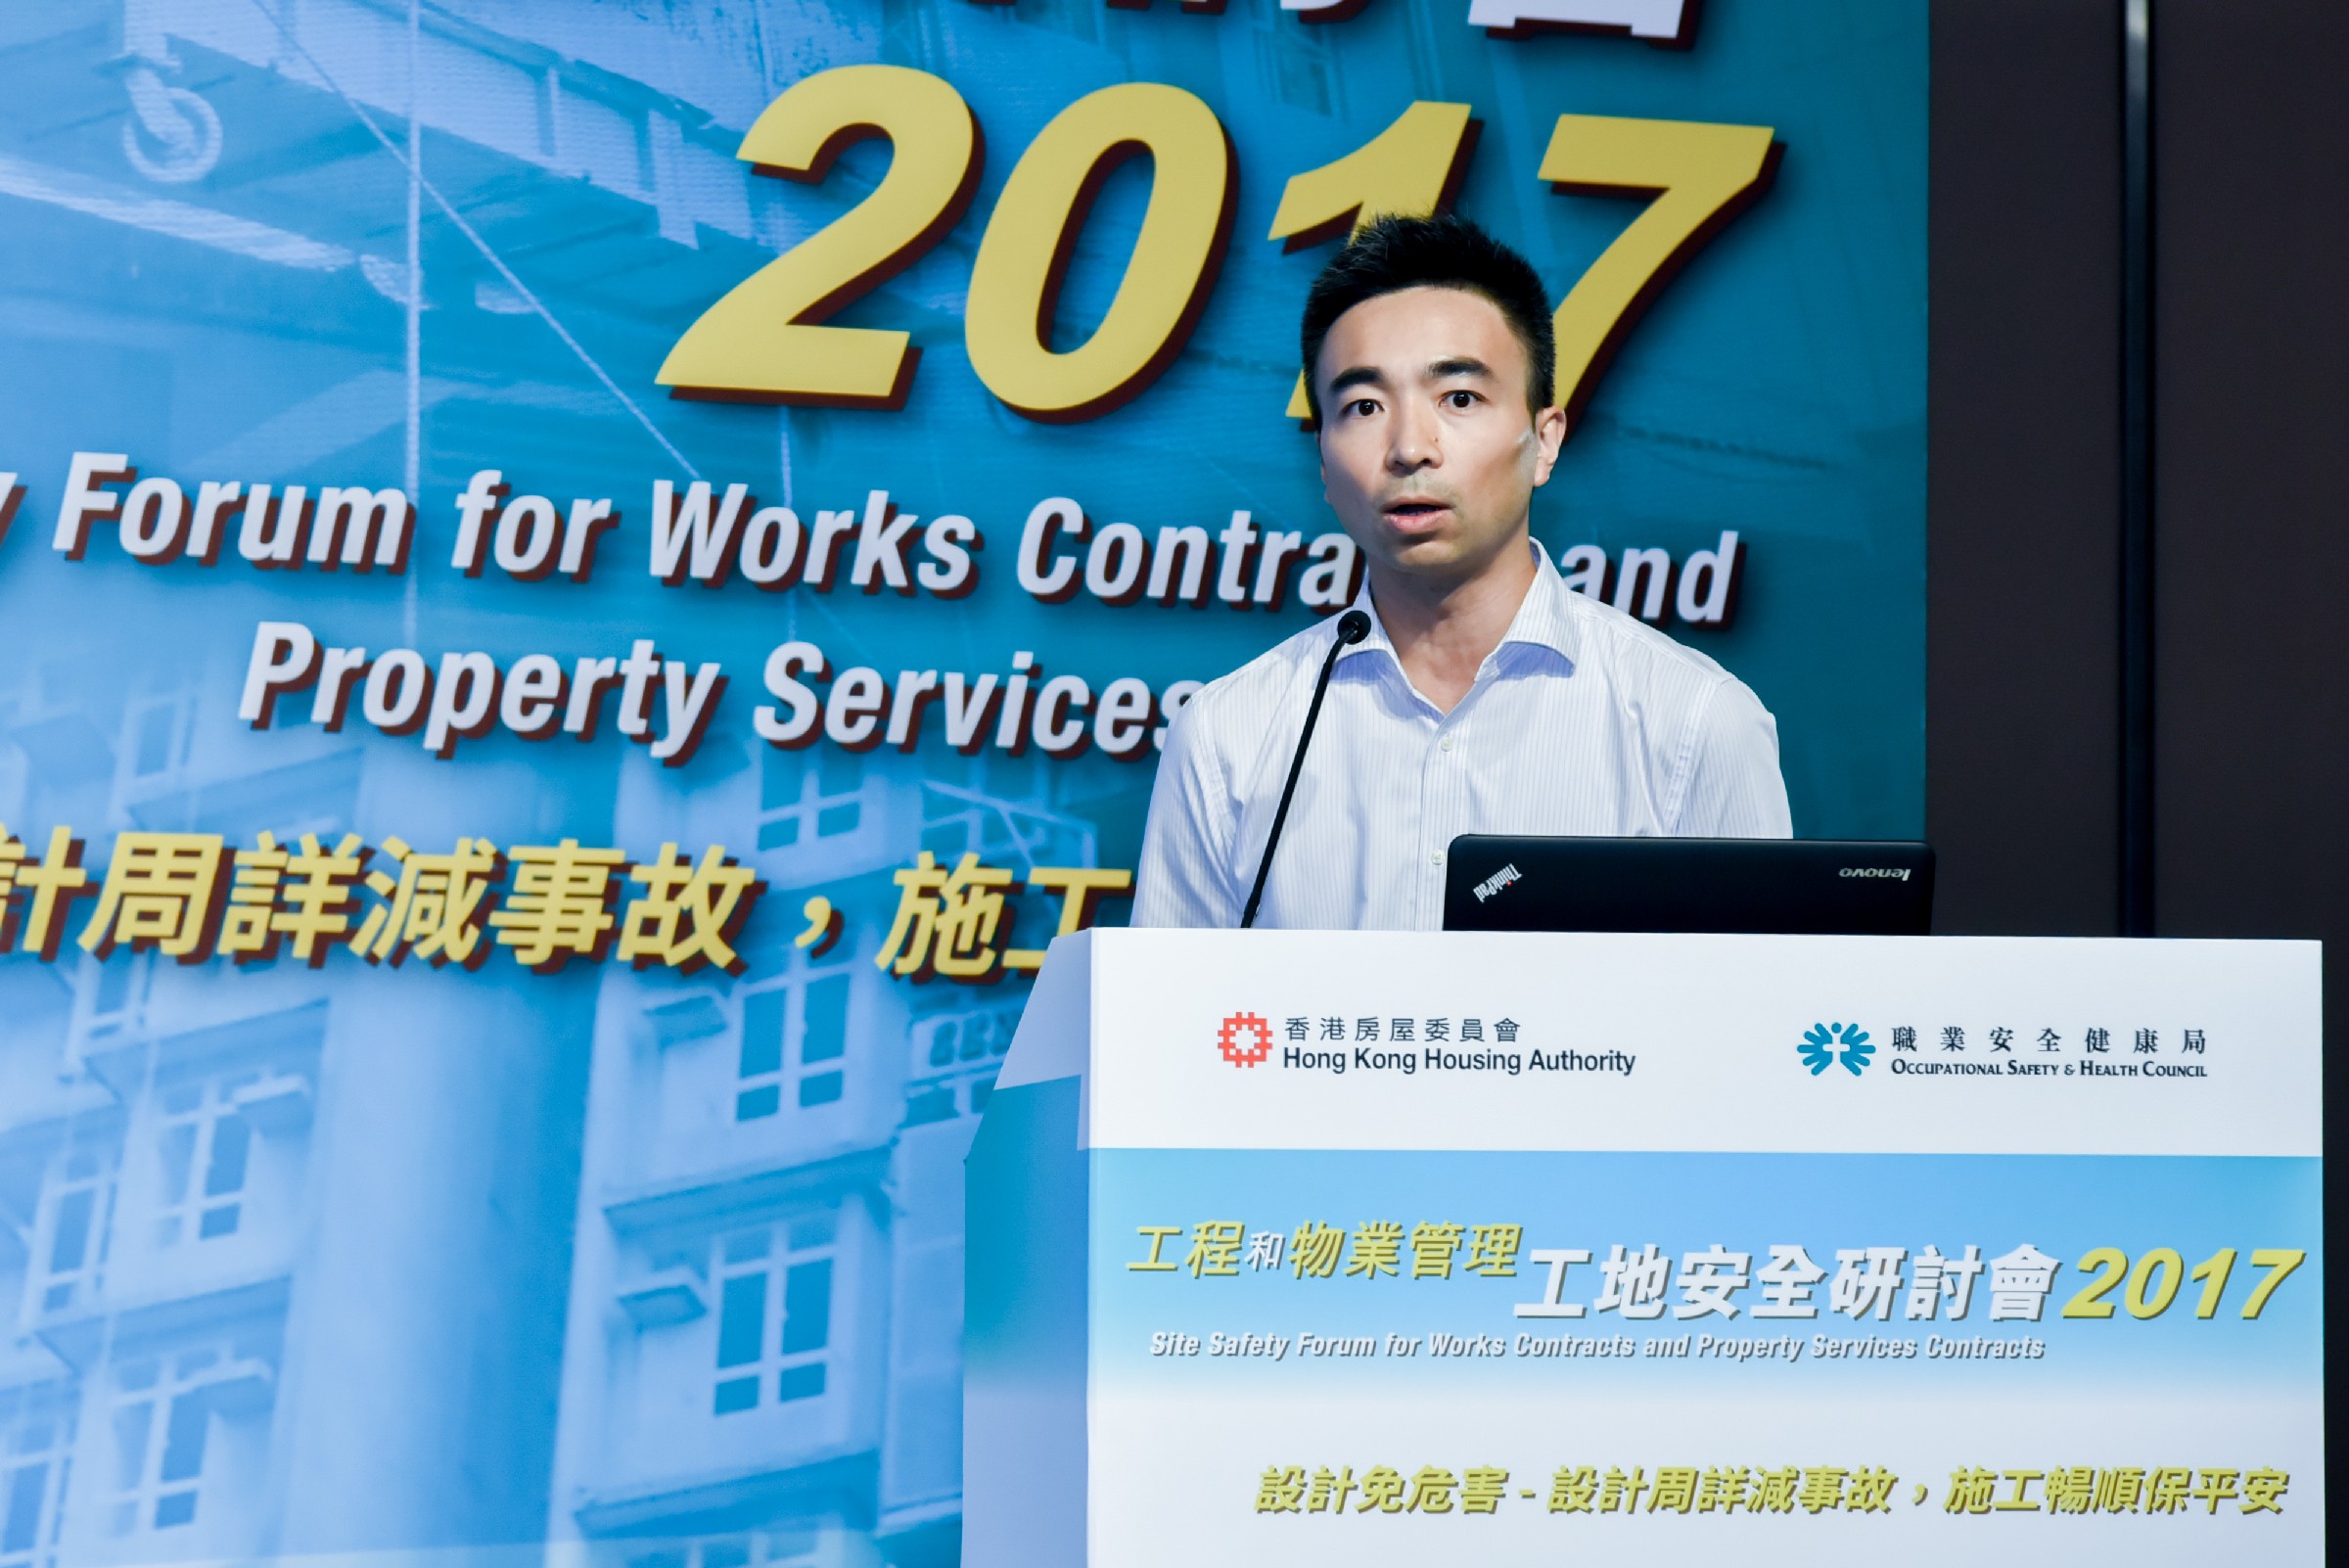 His presentation topic is interlocking guard of bar bending machines, the use of RFID technology in fatal zone warning system and the use of Virtual Reality in safety training.